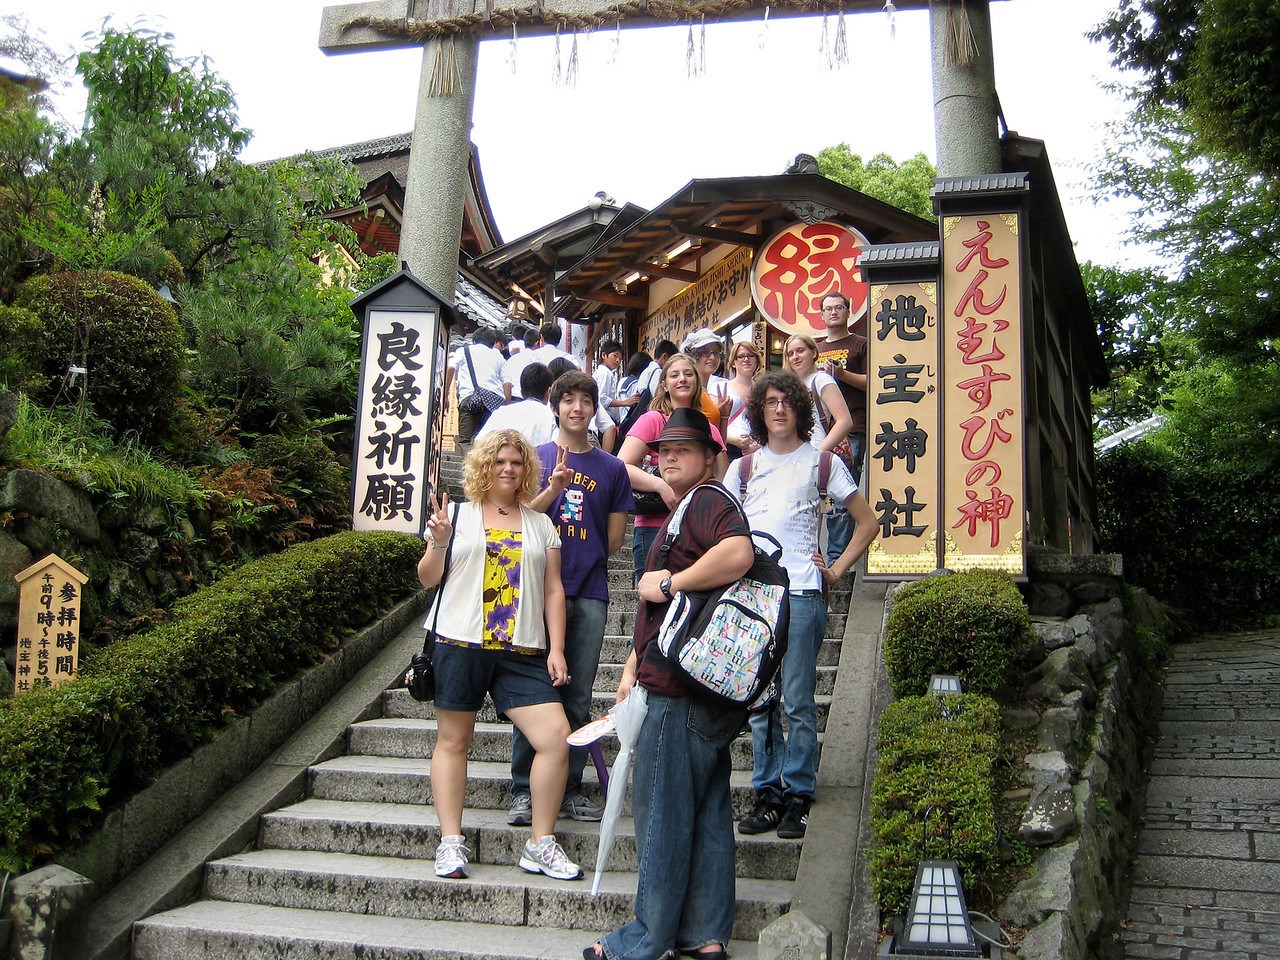 Study abroad trips are an integral part of the BGSU Japanese minor. Students study Japanese language, culture and religion.